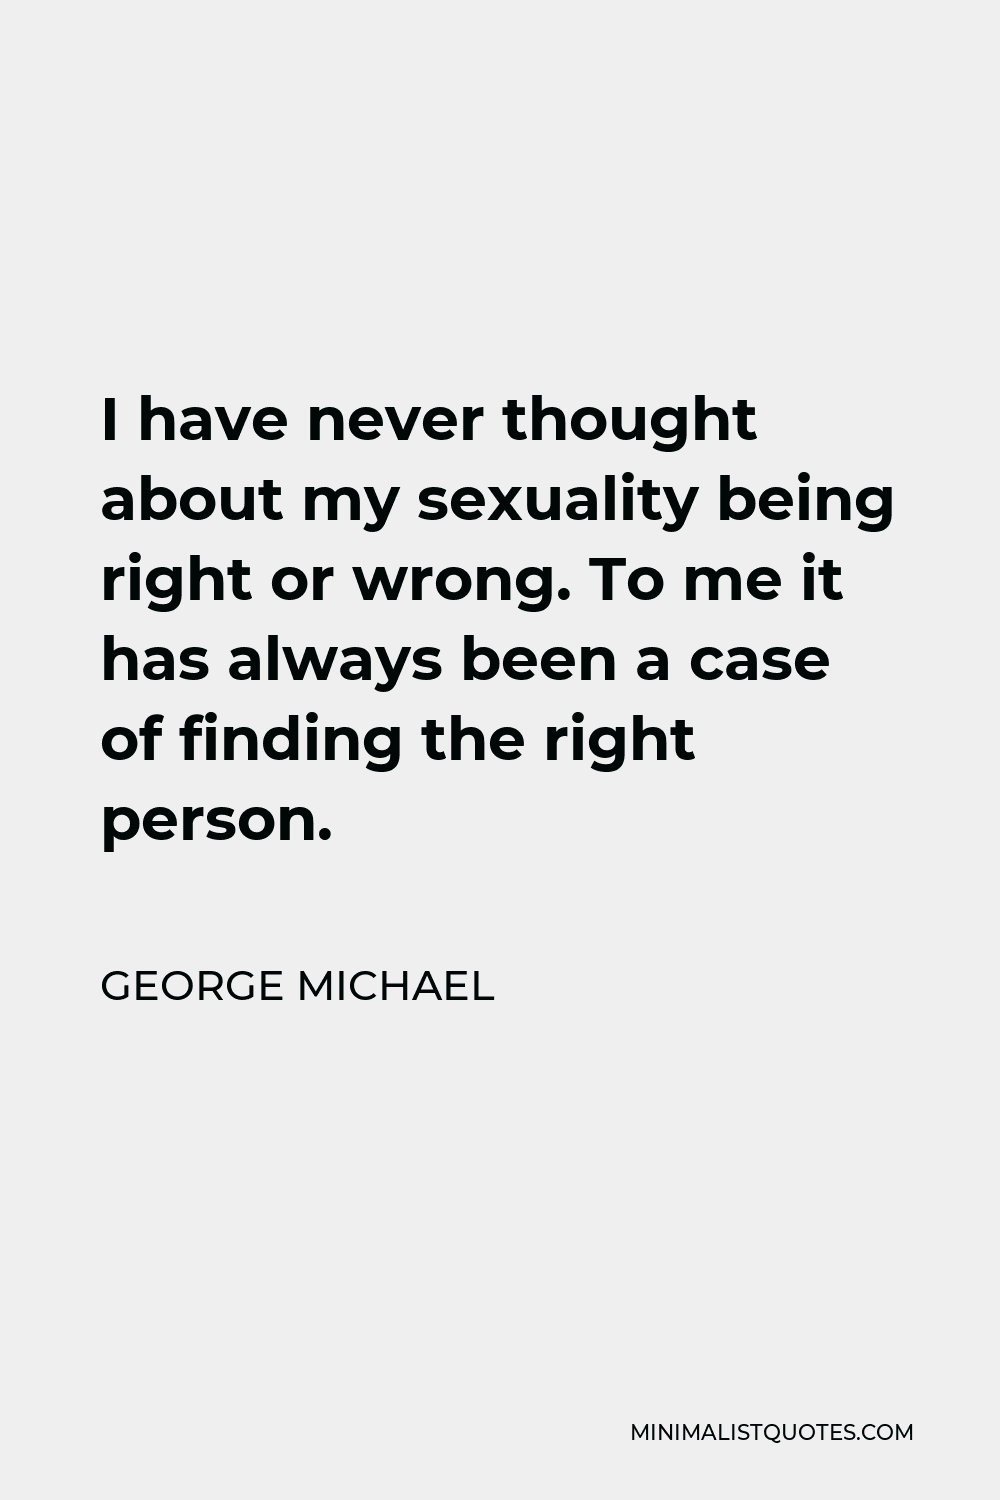 George Michael Quote - I have never thought about my sexuality being right or wrong. To me it has always been a case of finding the right person.